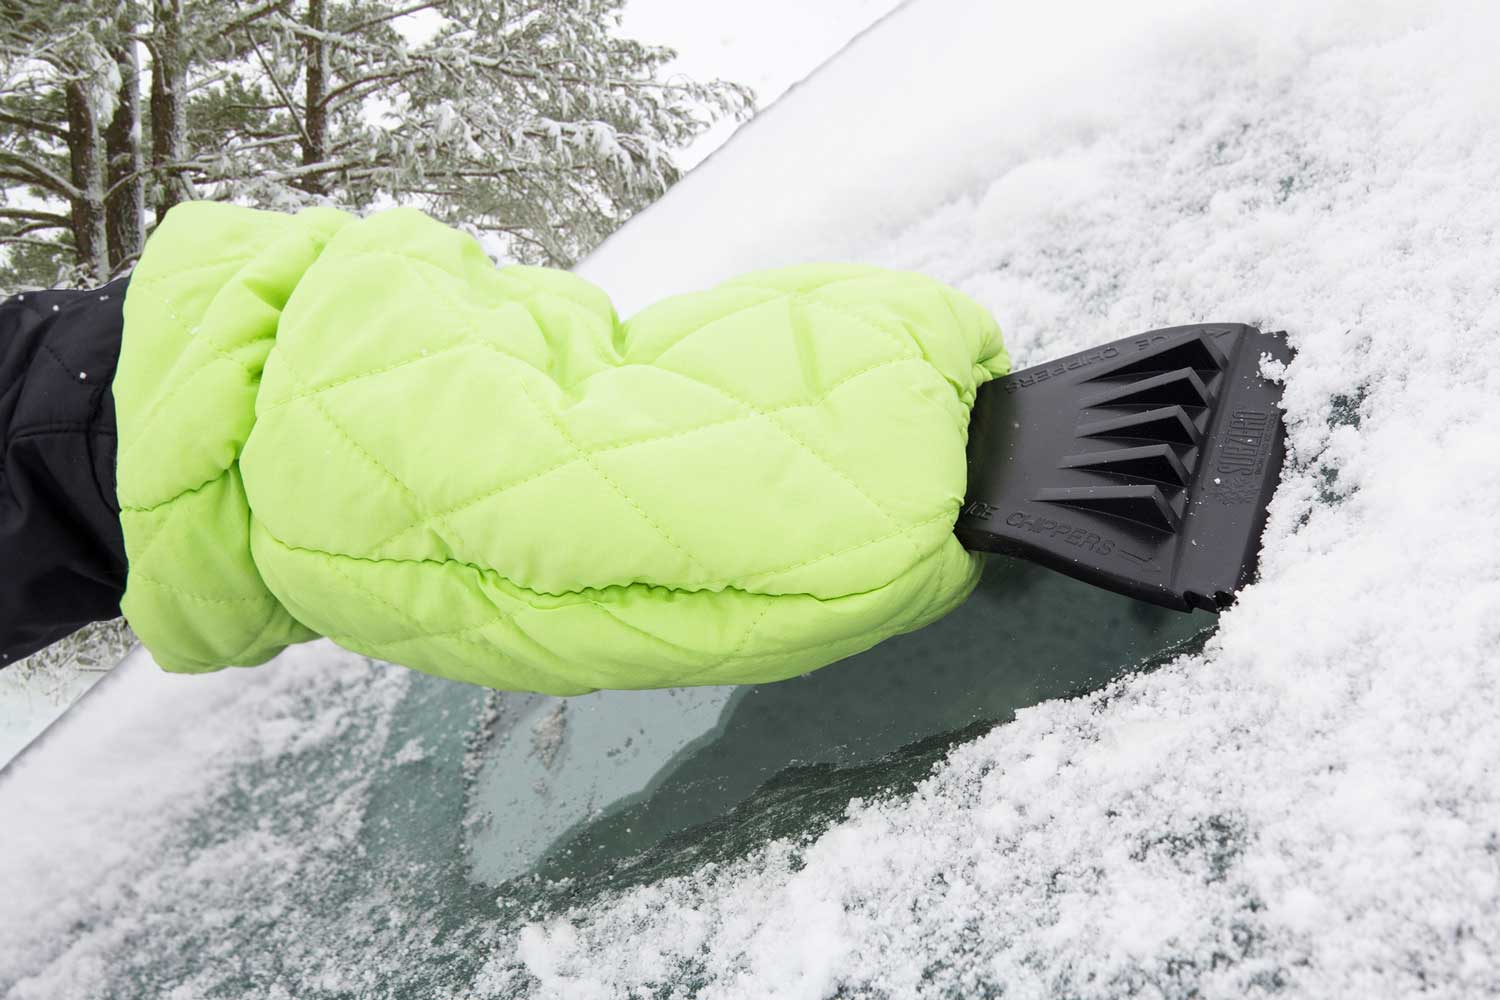 Fruholt 2 Packs Ice Scraper Mitt for Car Windshield Waterproof Snow Scraper Glove with Thick Fleece Lining for Car Window Snow Remover Scratch-Free 